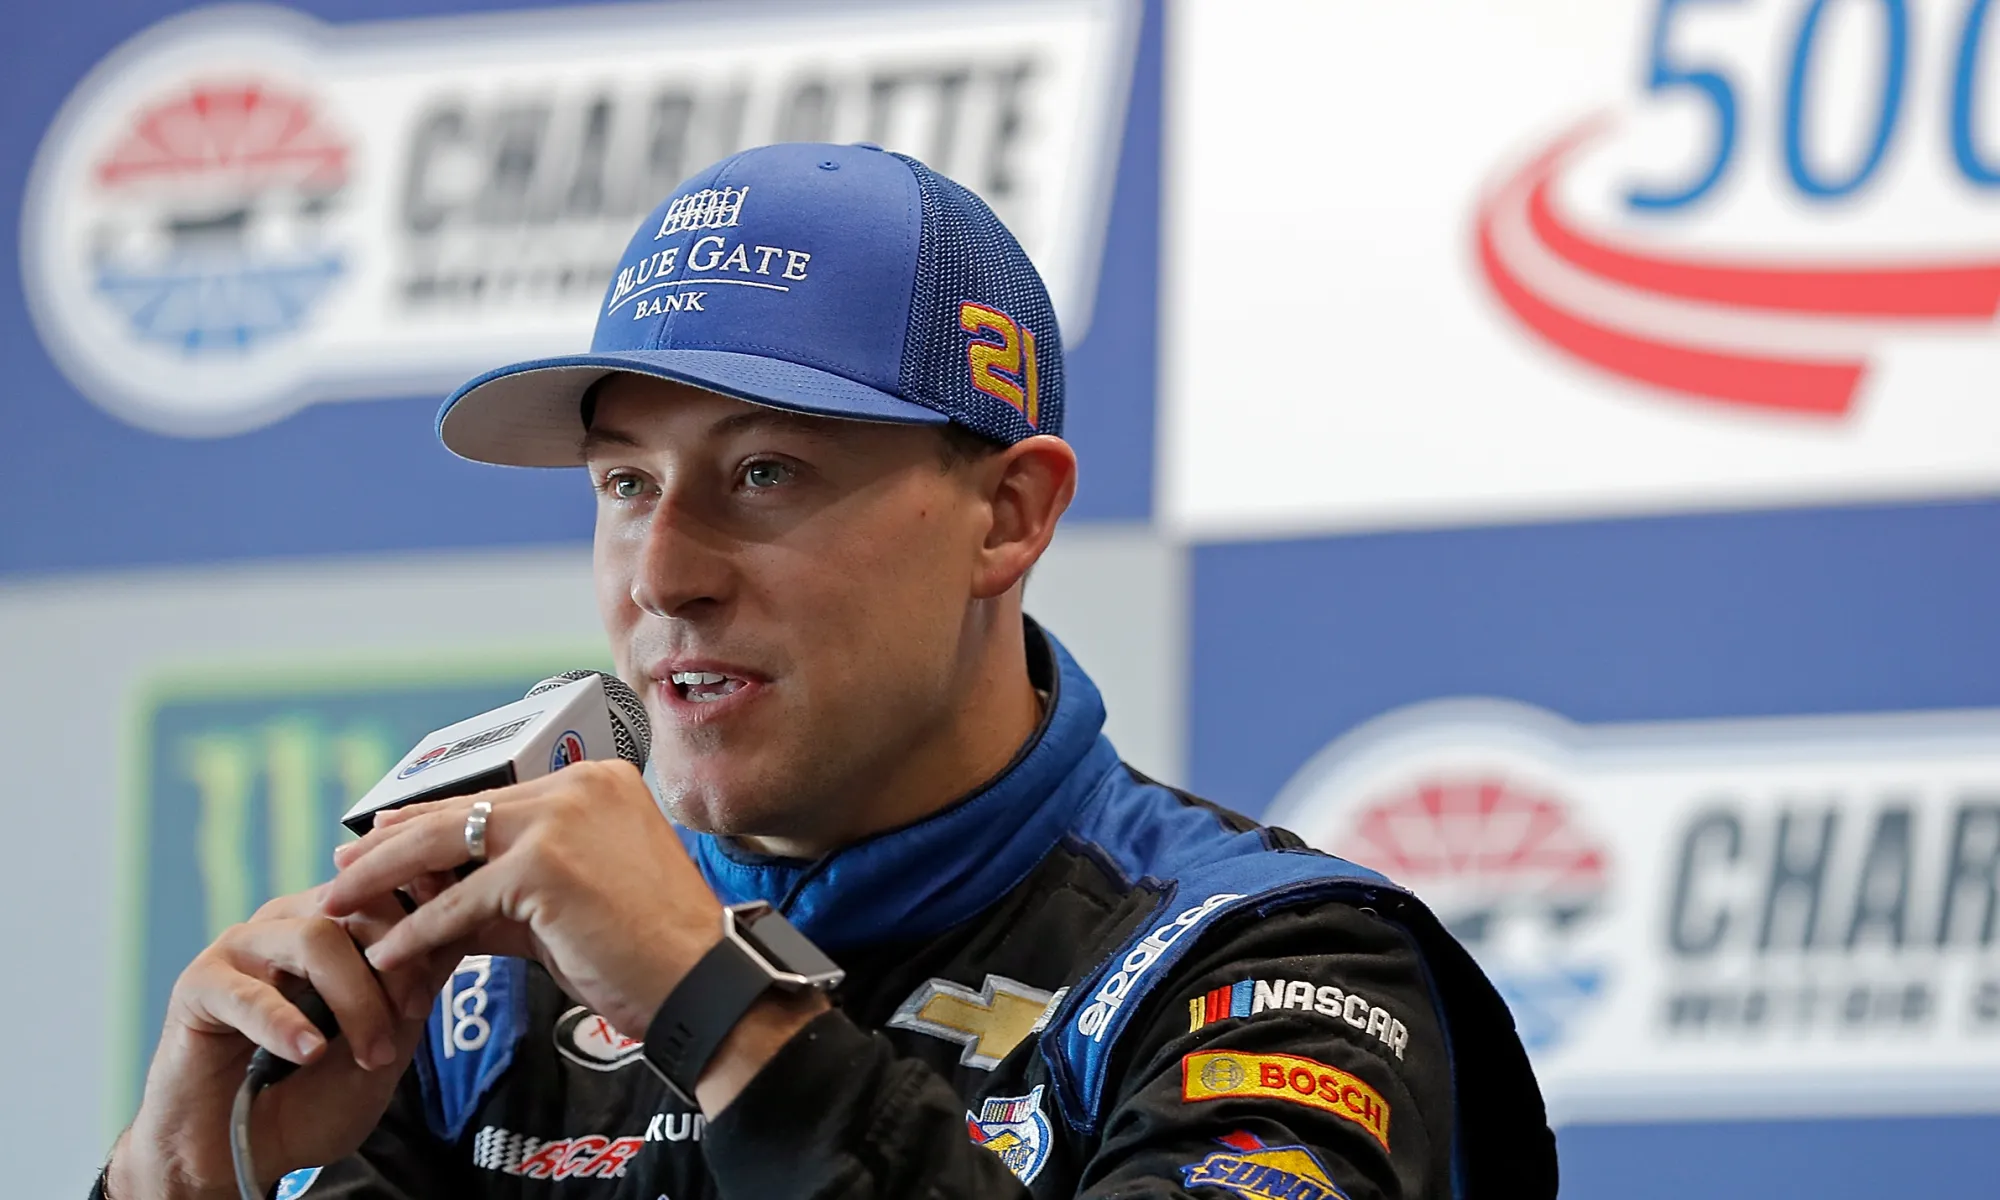 Daniel Hemric Receives Unexpected Gift with Dover Top 10 Finish